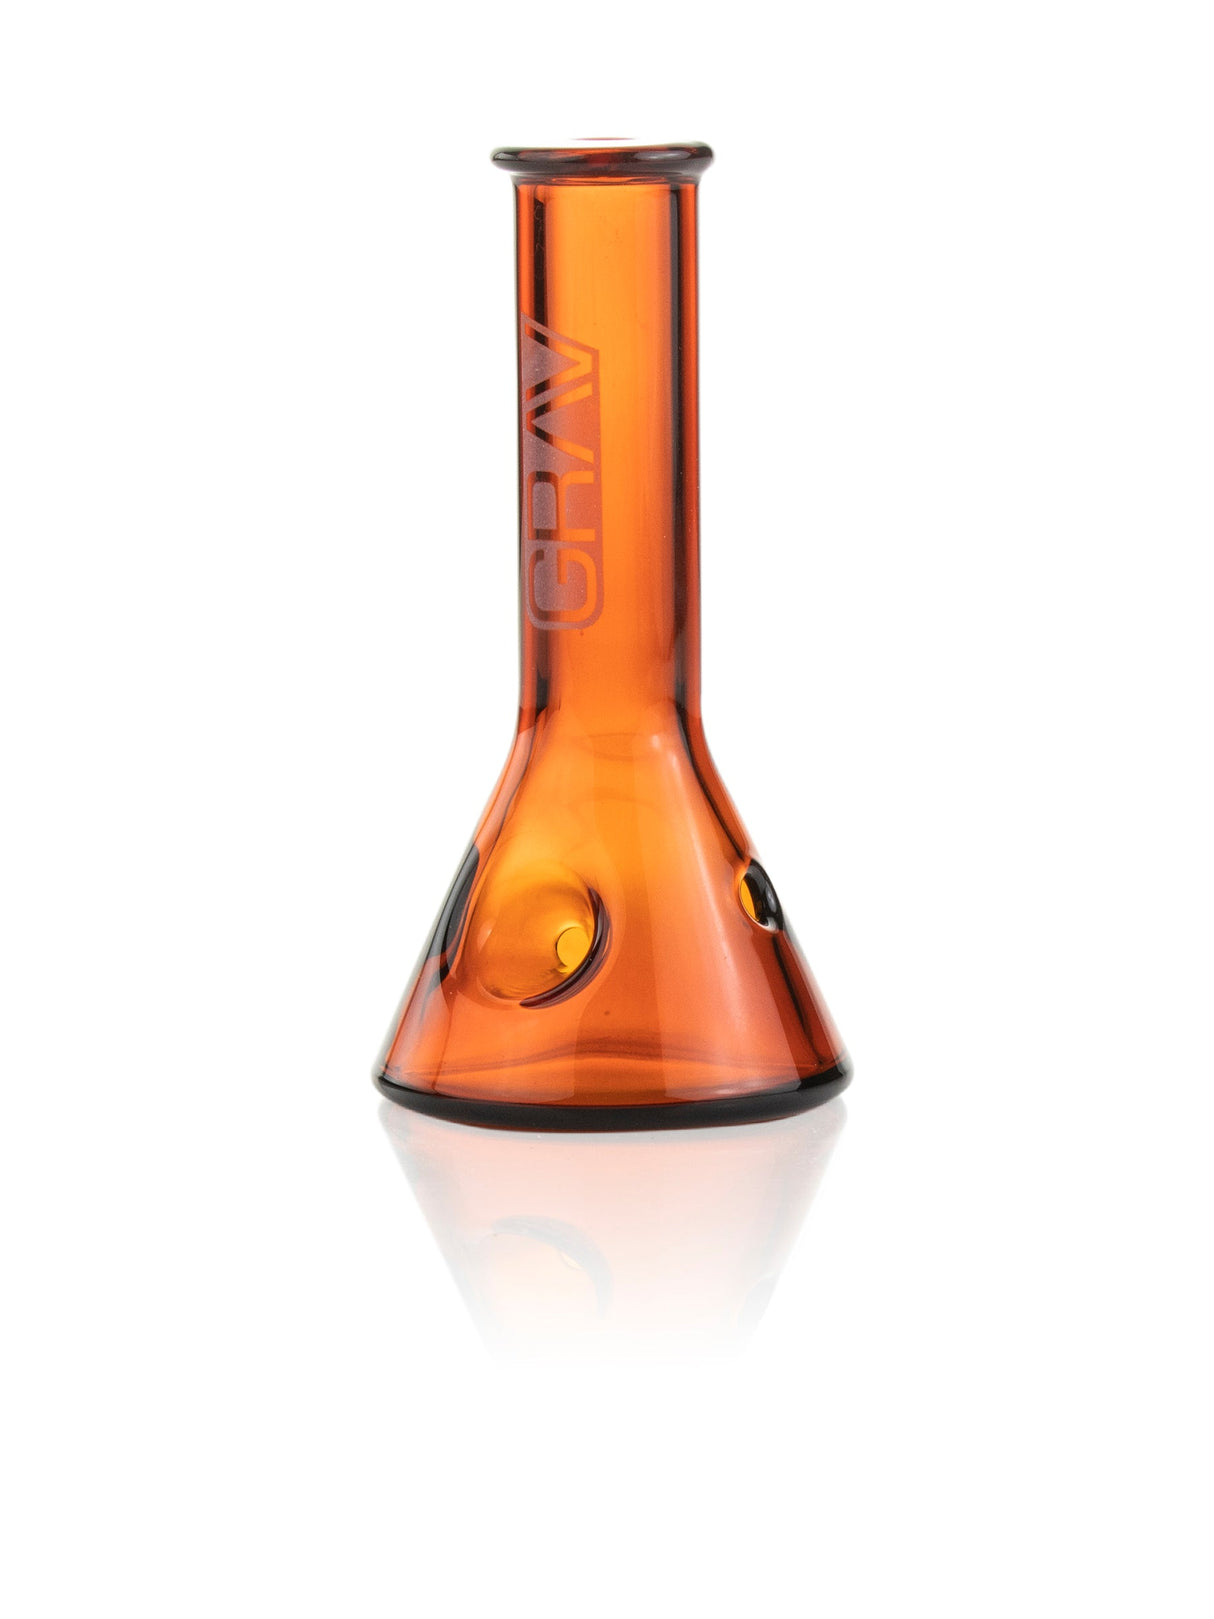 GRAV Beaker Spoon in Amber - Front View on White Background - Compact Borosilicate Glass Pipe